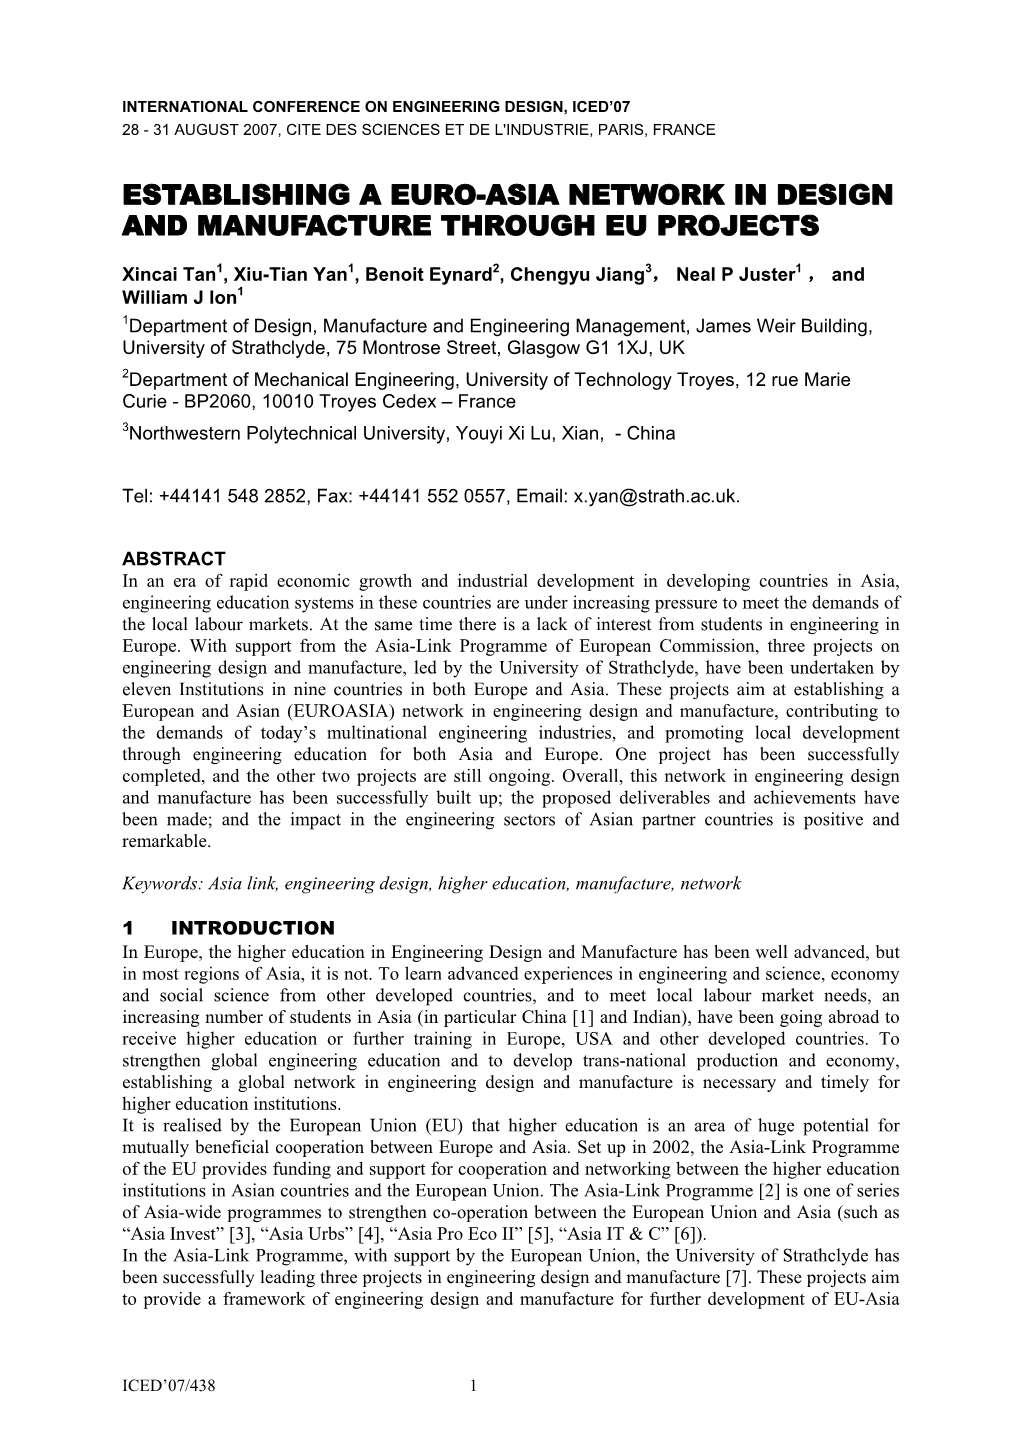 Establishing a Euro-Asia Network in Design and Manufacture Through Eu Projects